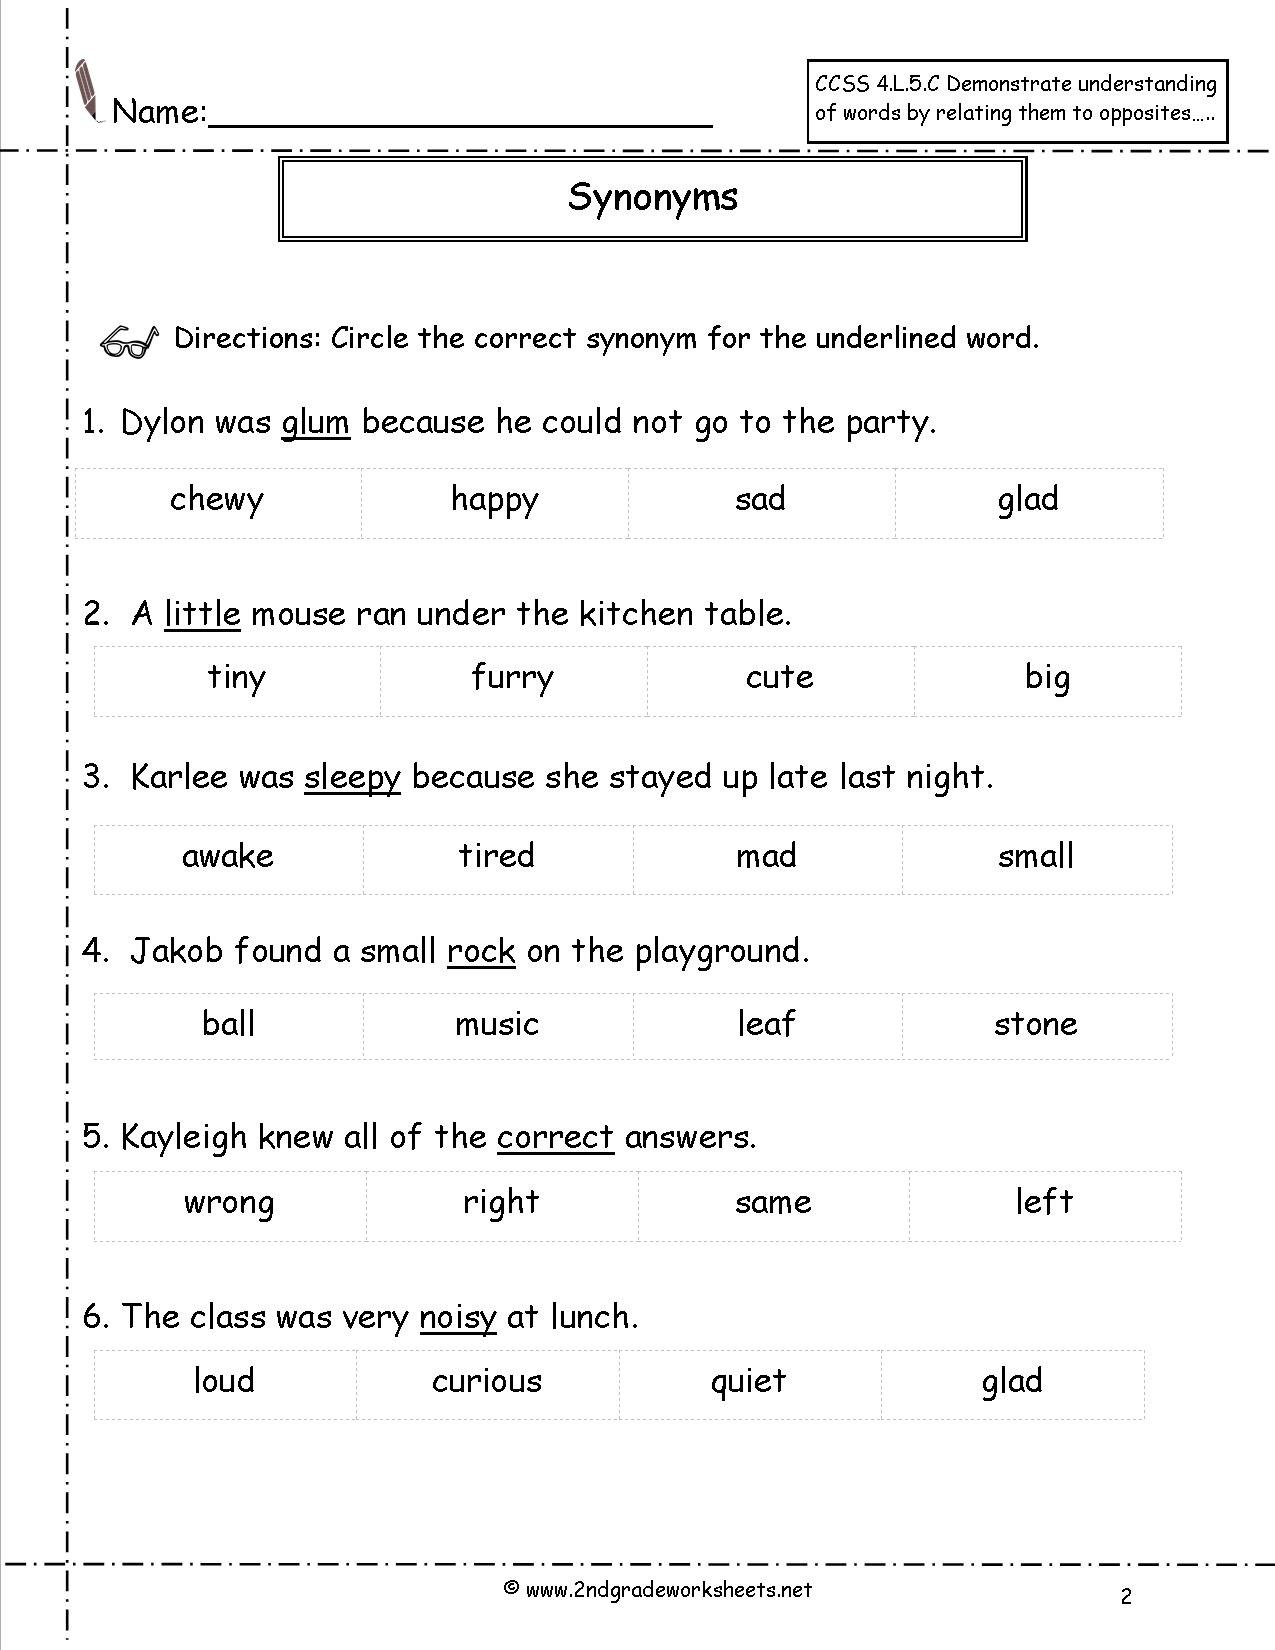 free-printable-worksheets-synonyms-antonyms-and-homonyms-peggy-worksheets